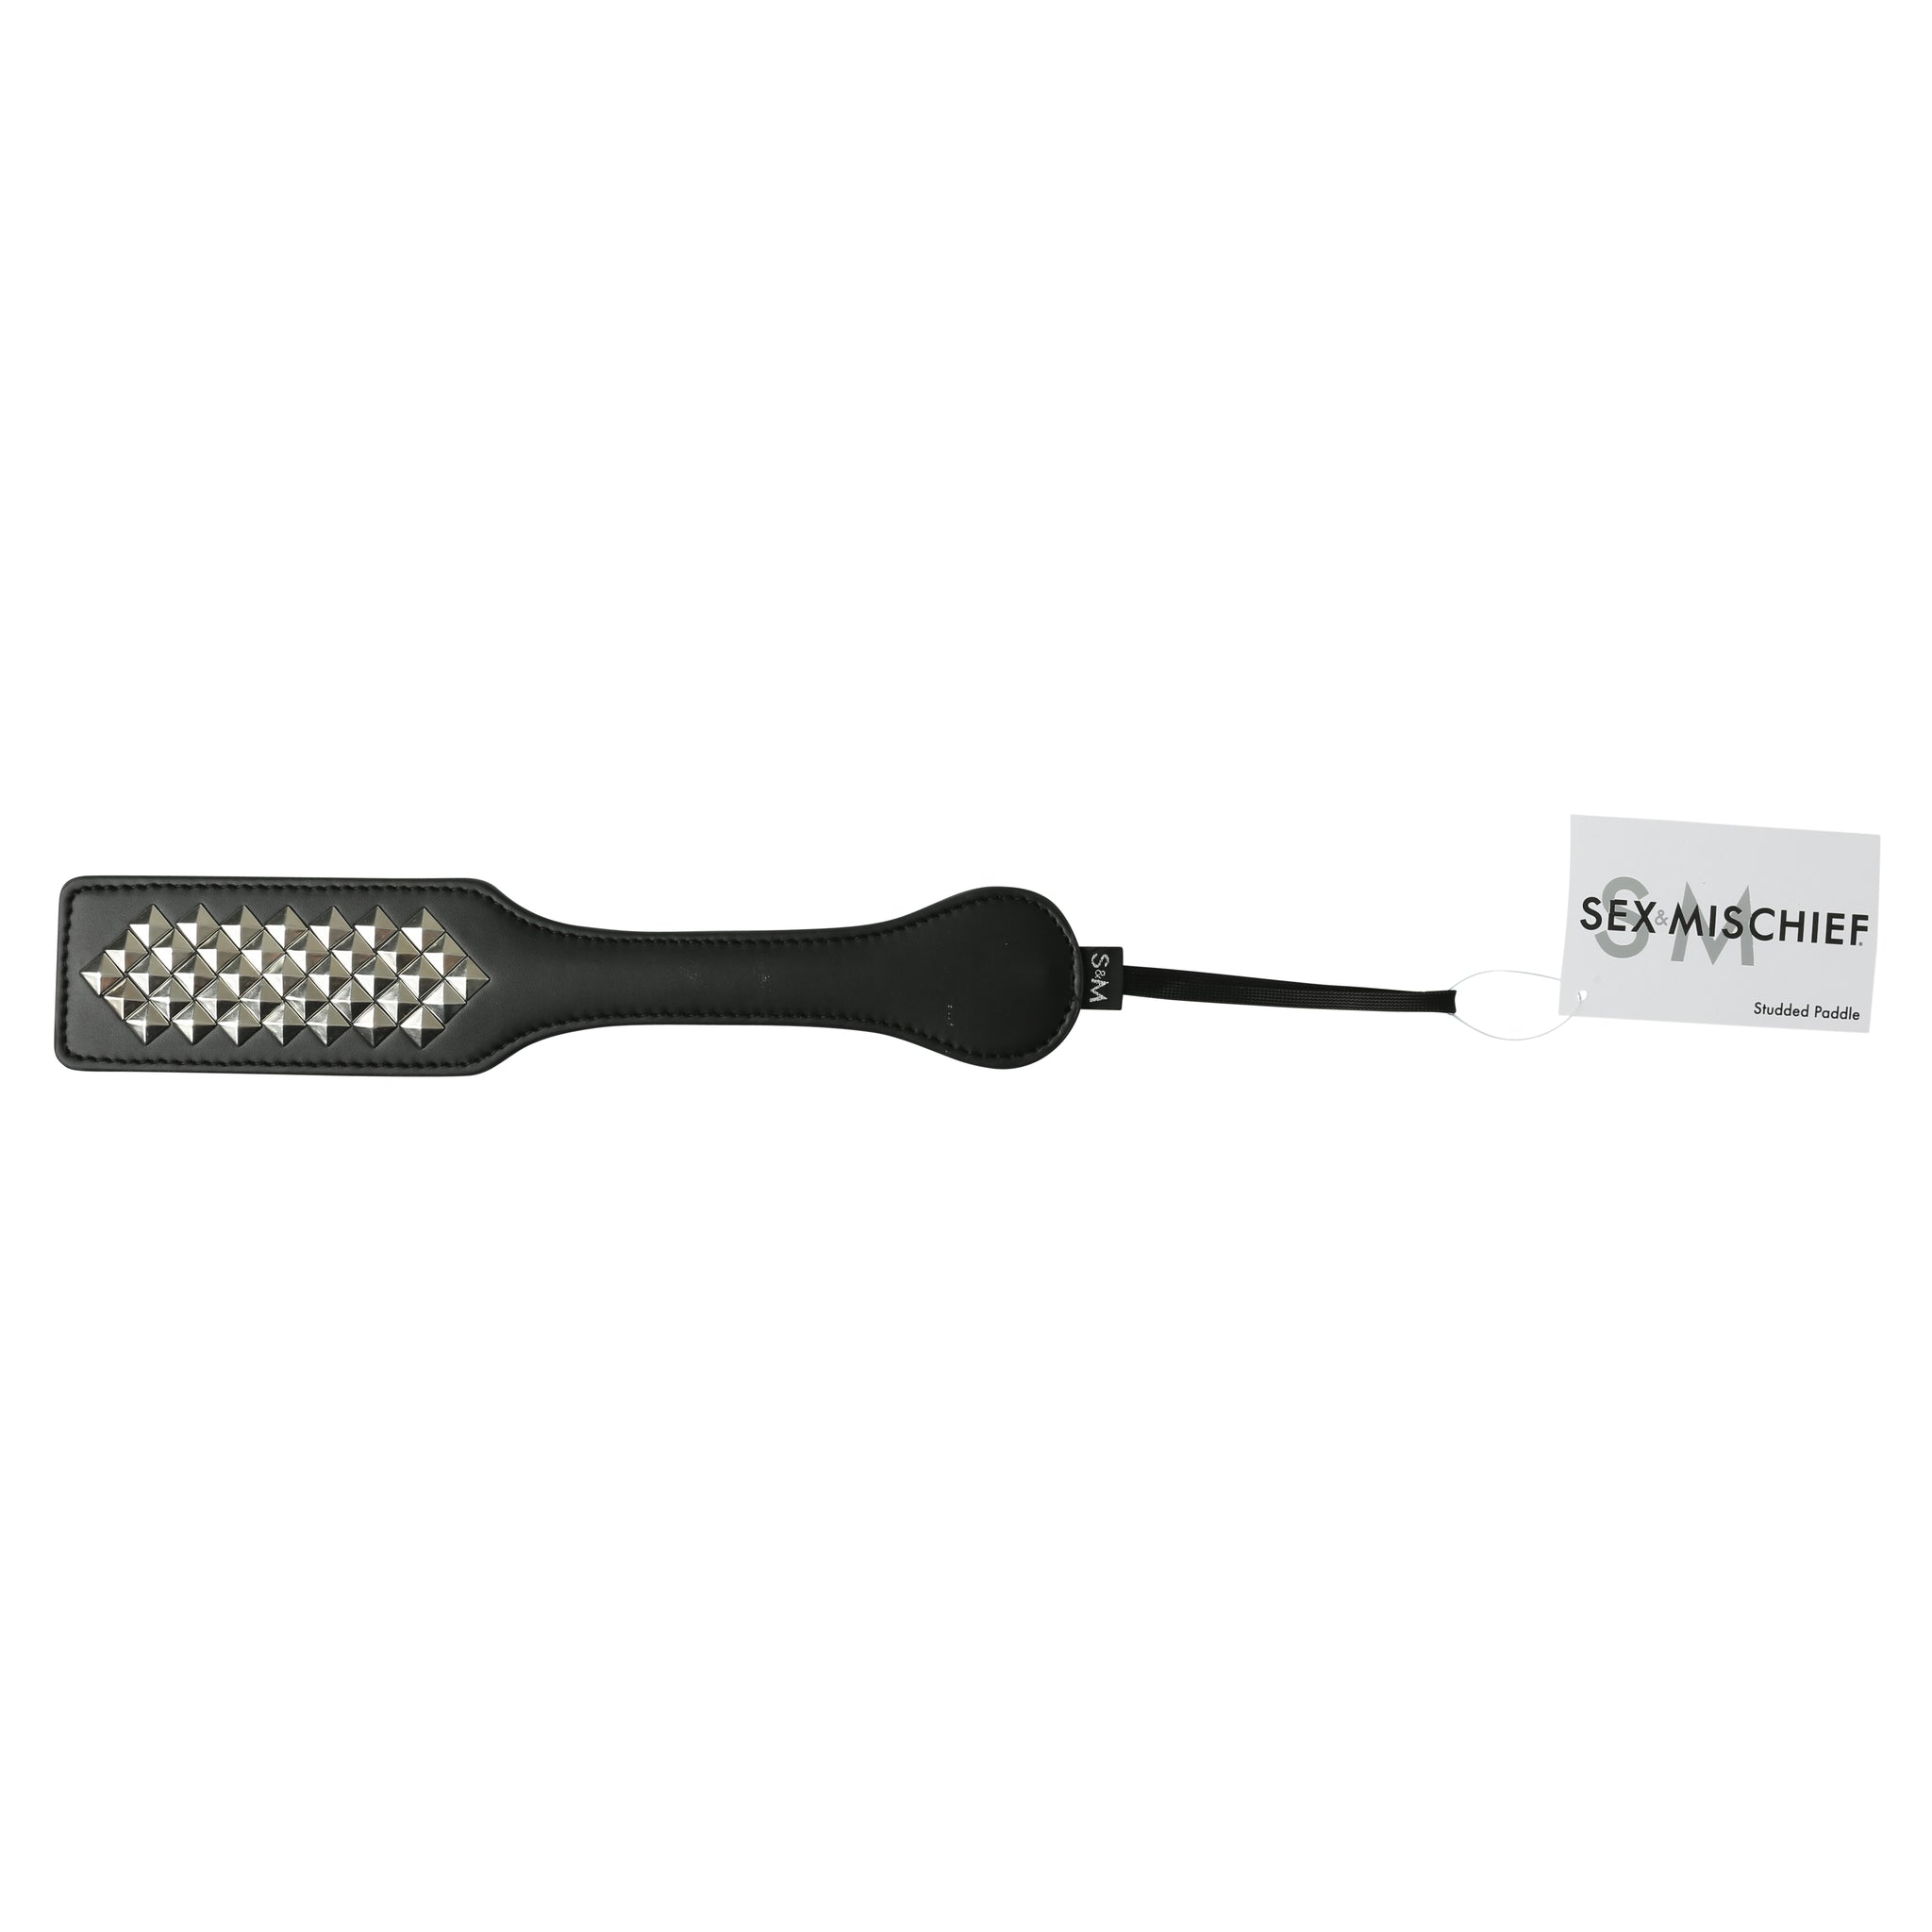 Sex and Mischief Studded Paddle - Black